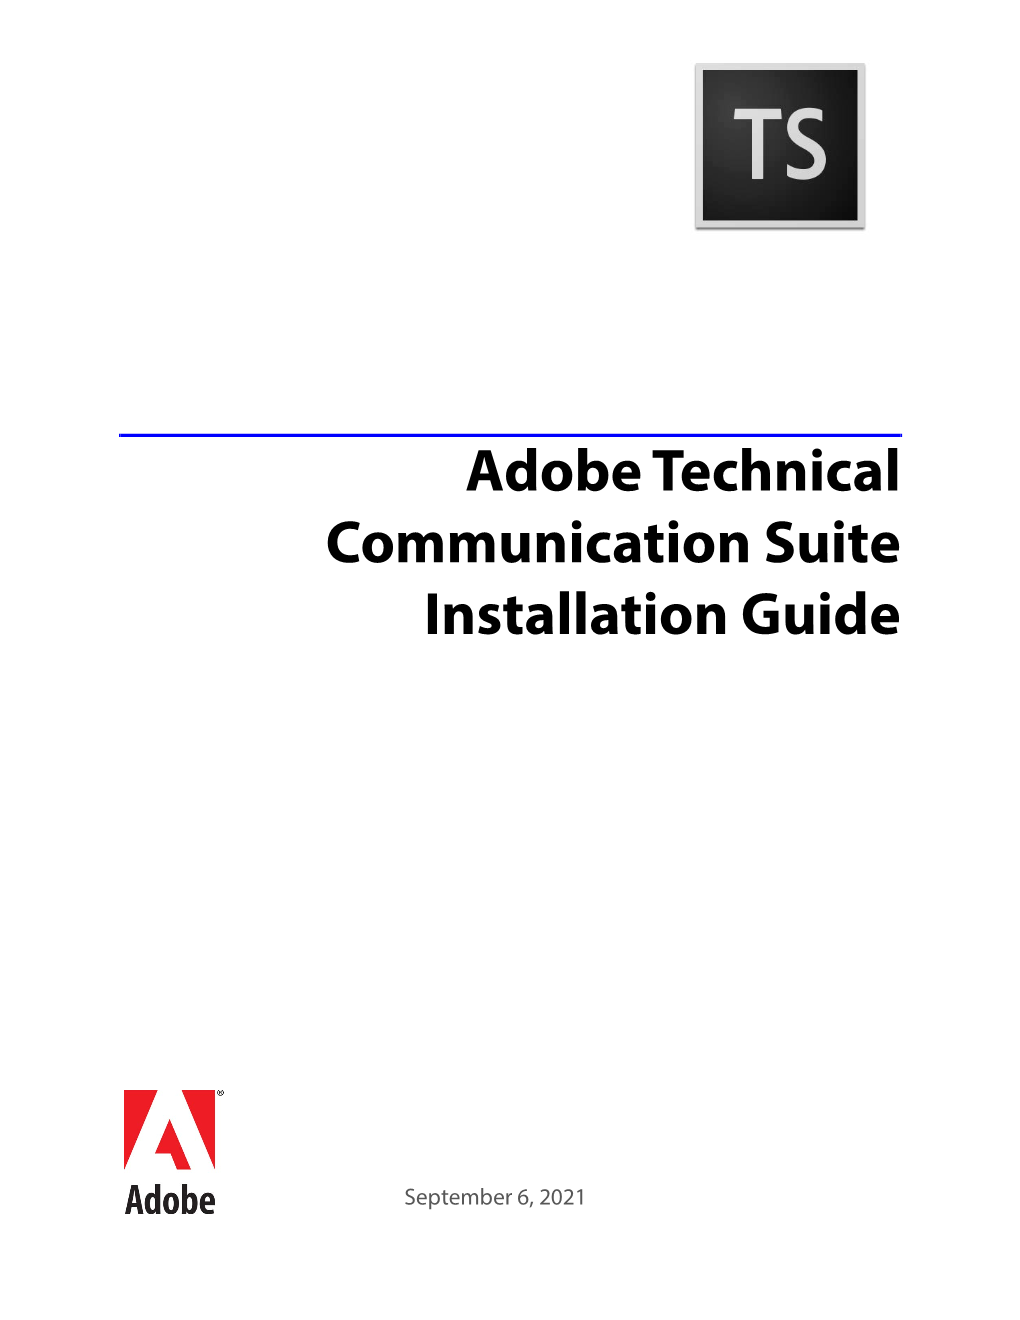 Adobe Technical Communication Suite Installation Guide